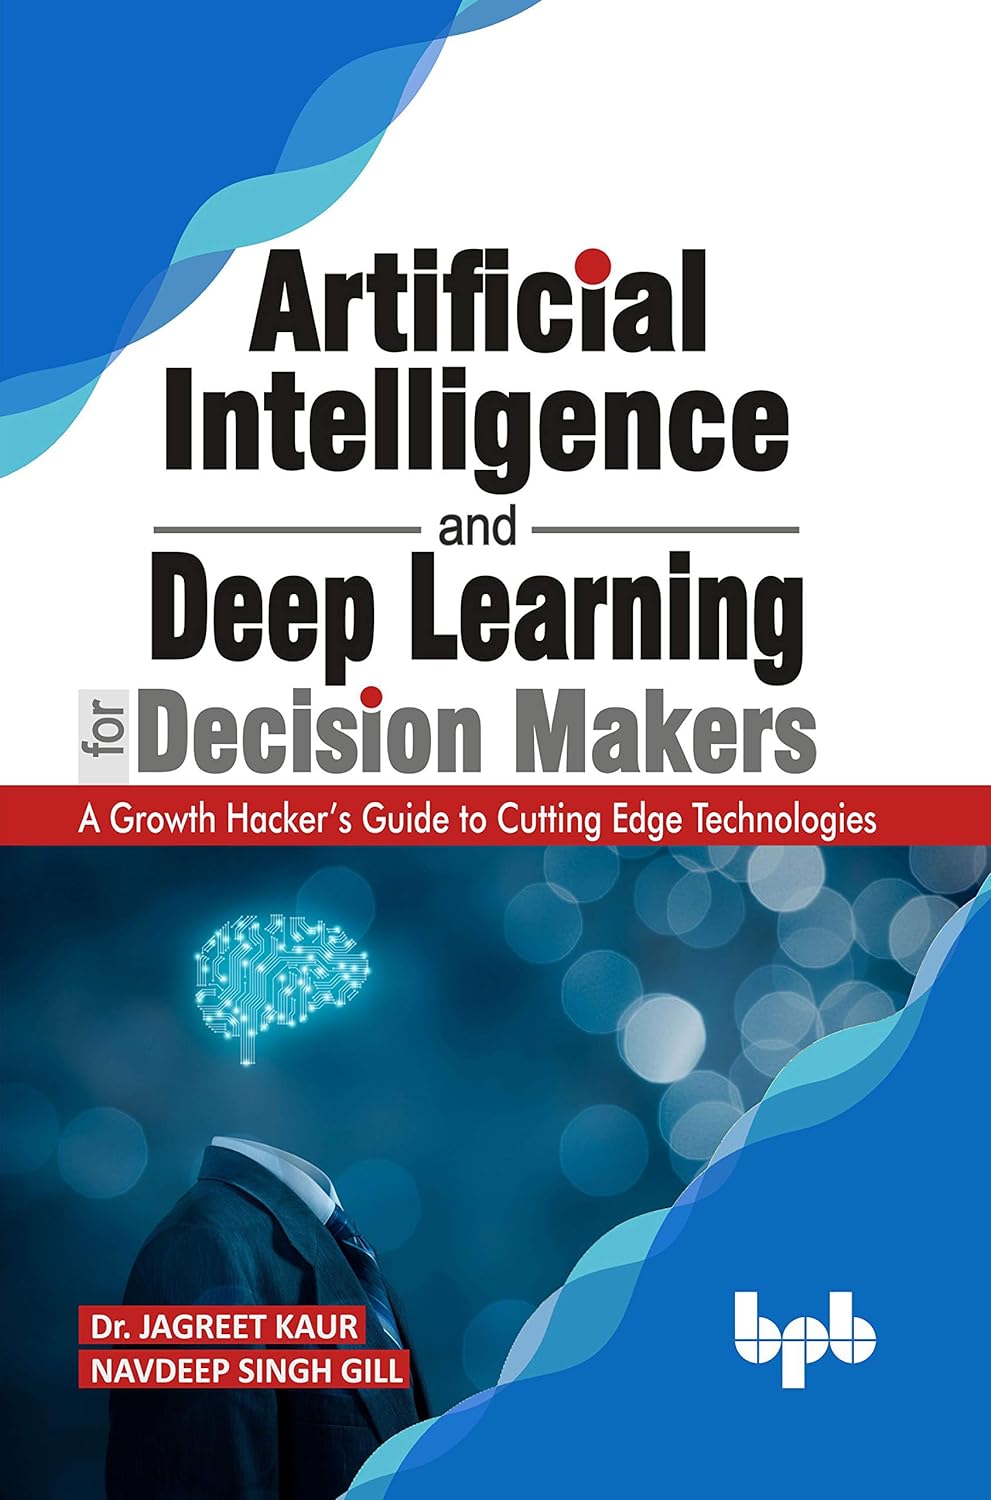 Artificial Intelligence and Deep Learning for Decision Makers: A Growth Hacker s Guide to Cutting Edge Technologies by  Dr. Jagreet Kaur